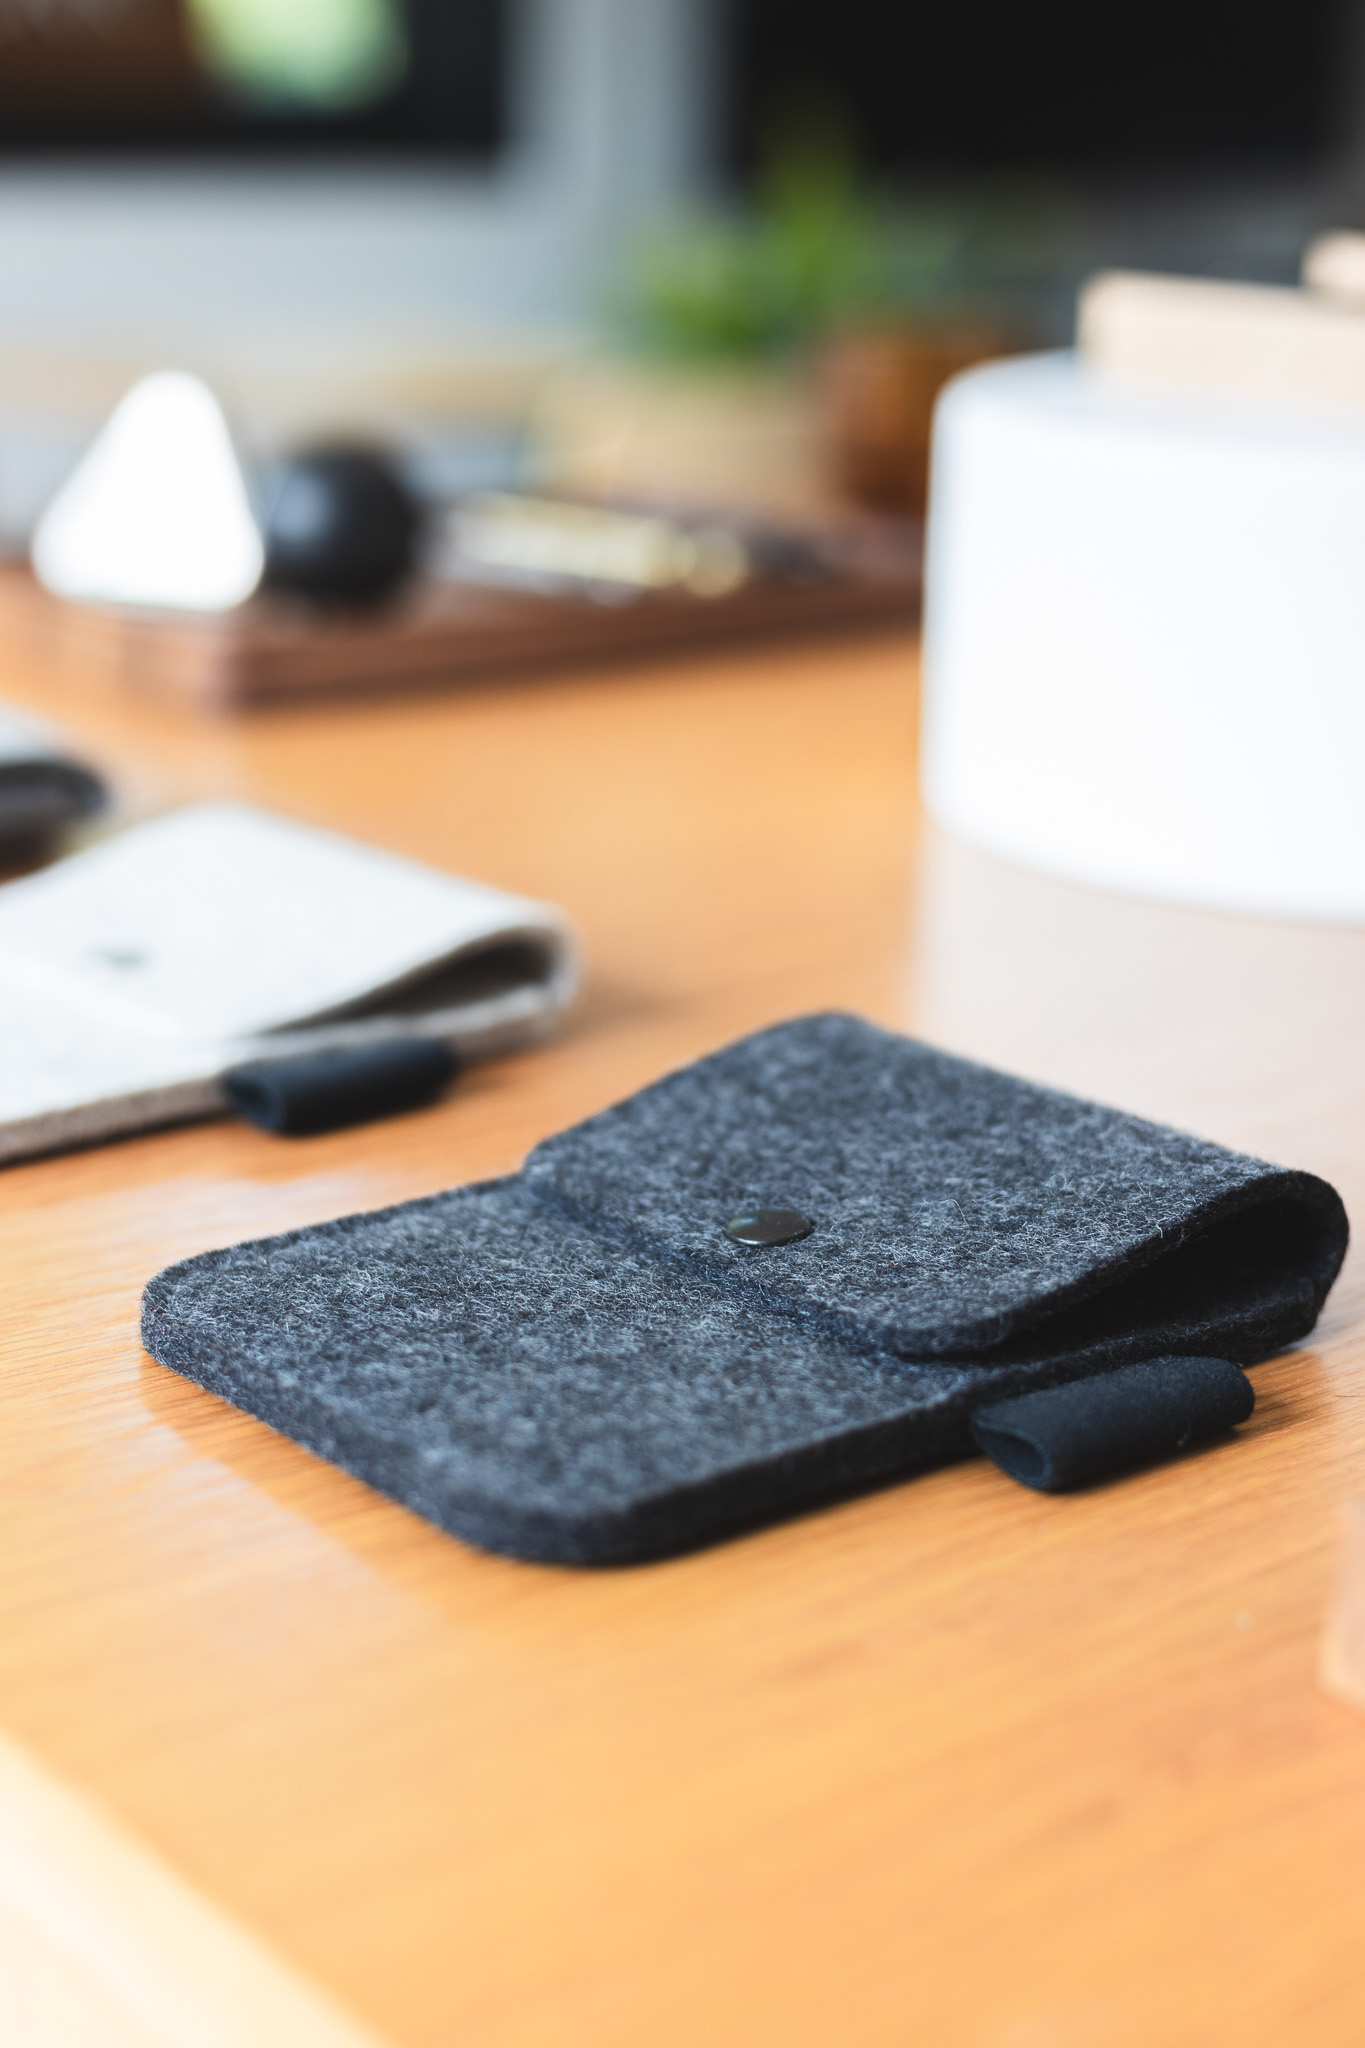 Felt pouch from Ugmonk